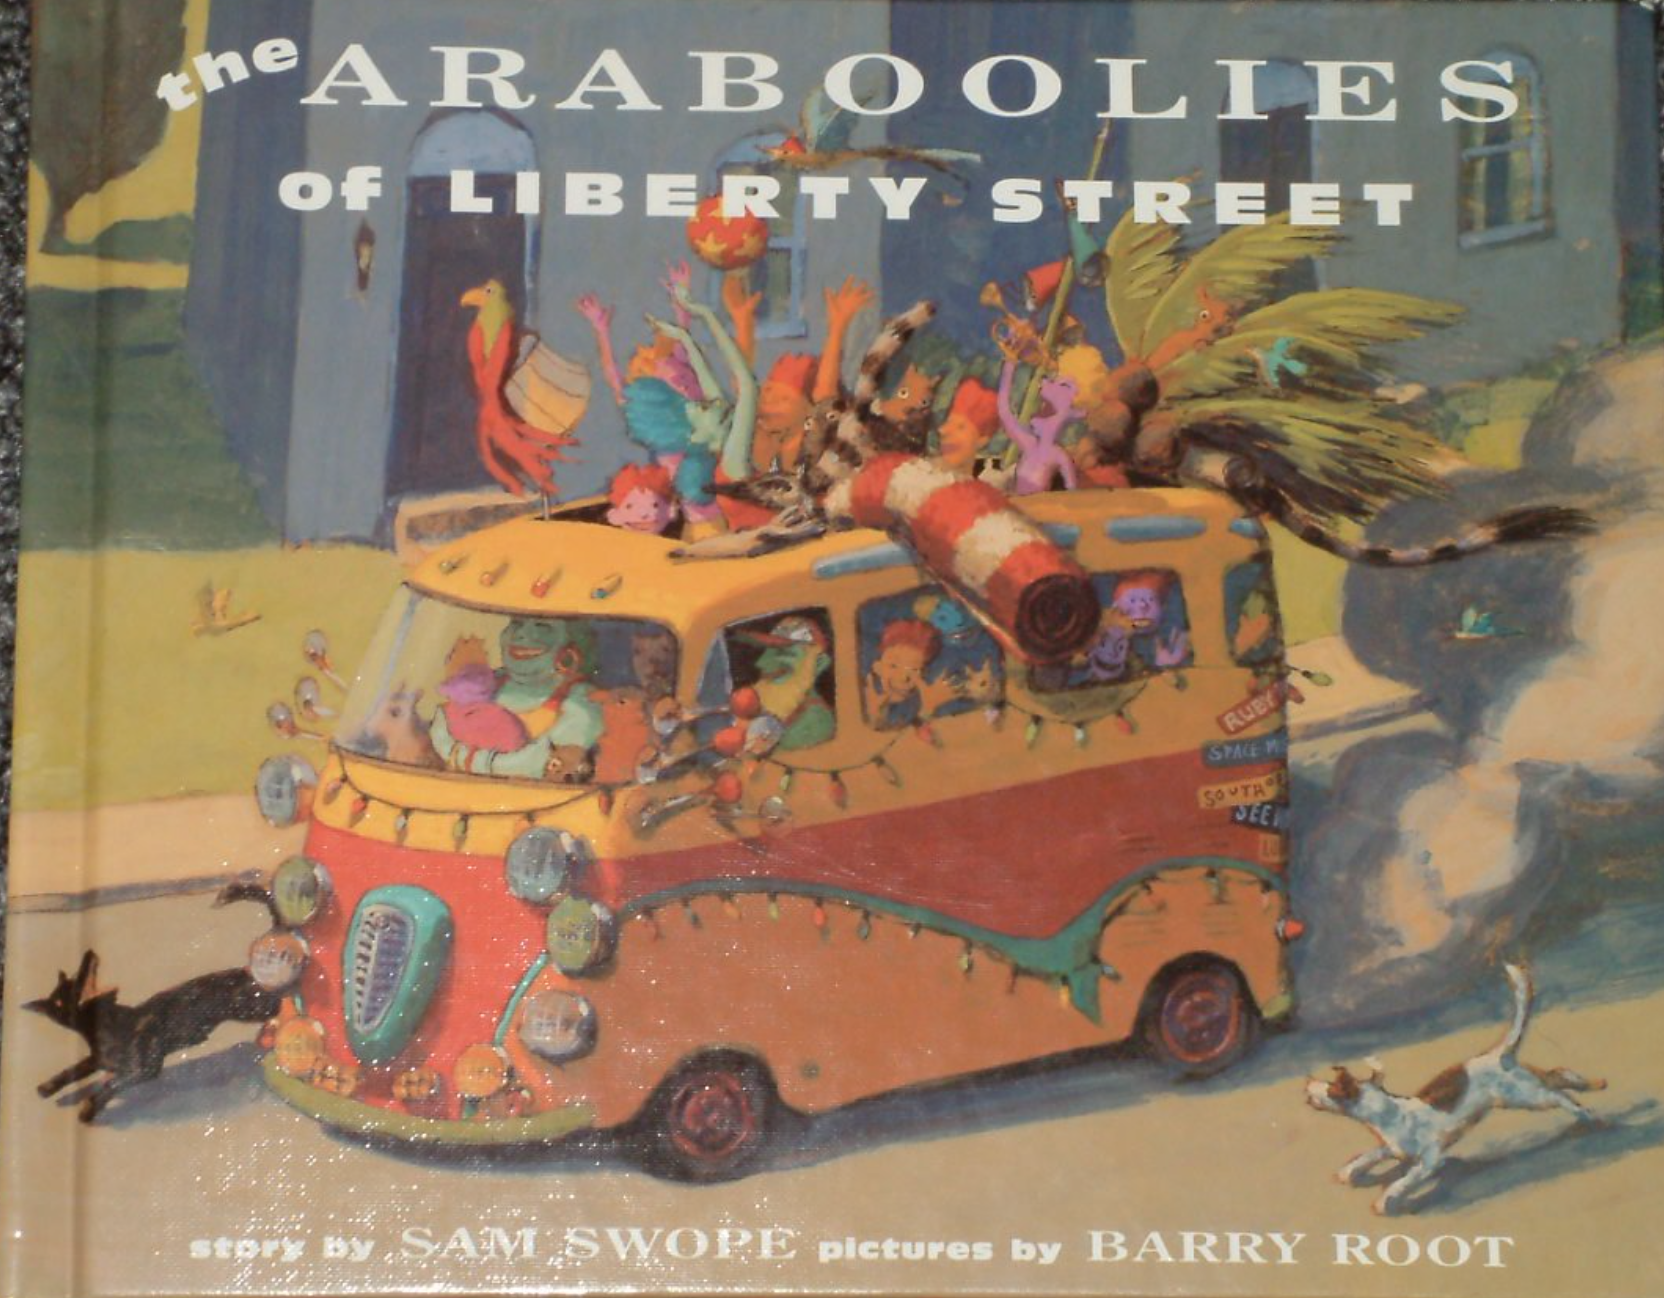 Illustrated book cover for The Araboolies of Liberty Street with a drawing of a colorful bus overflowing with happy people and animals. A gray house stands in the background.